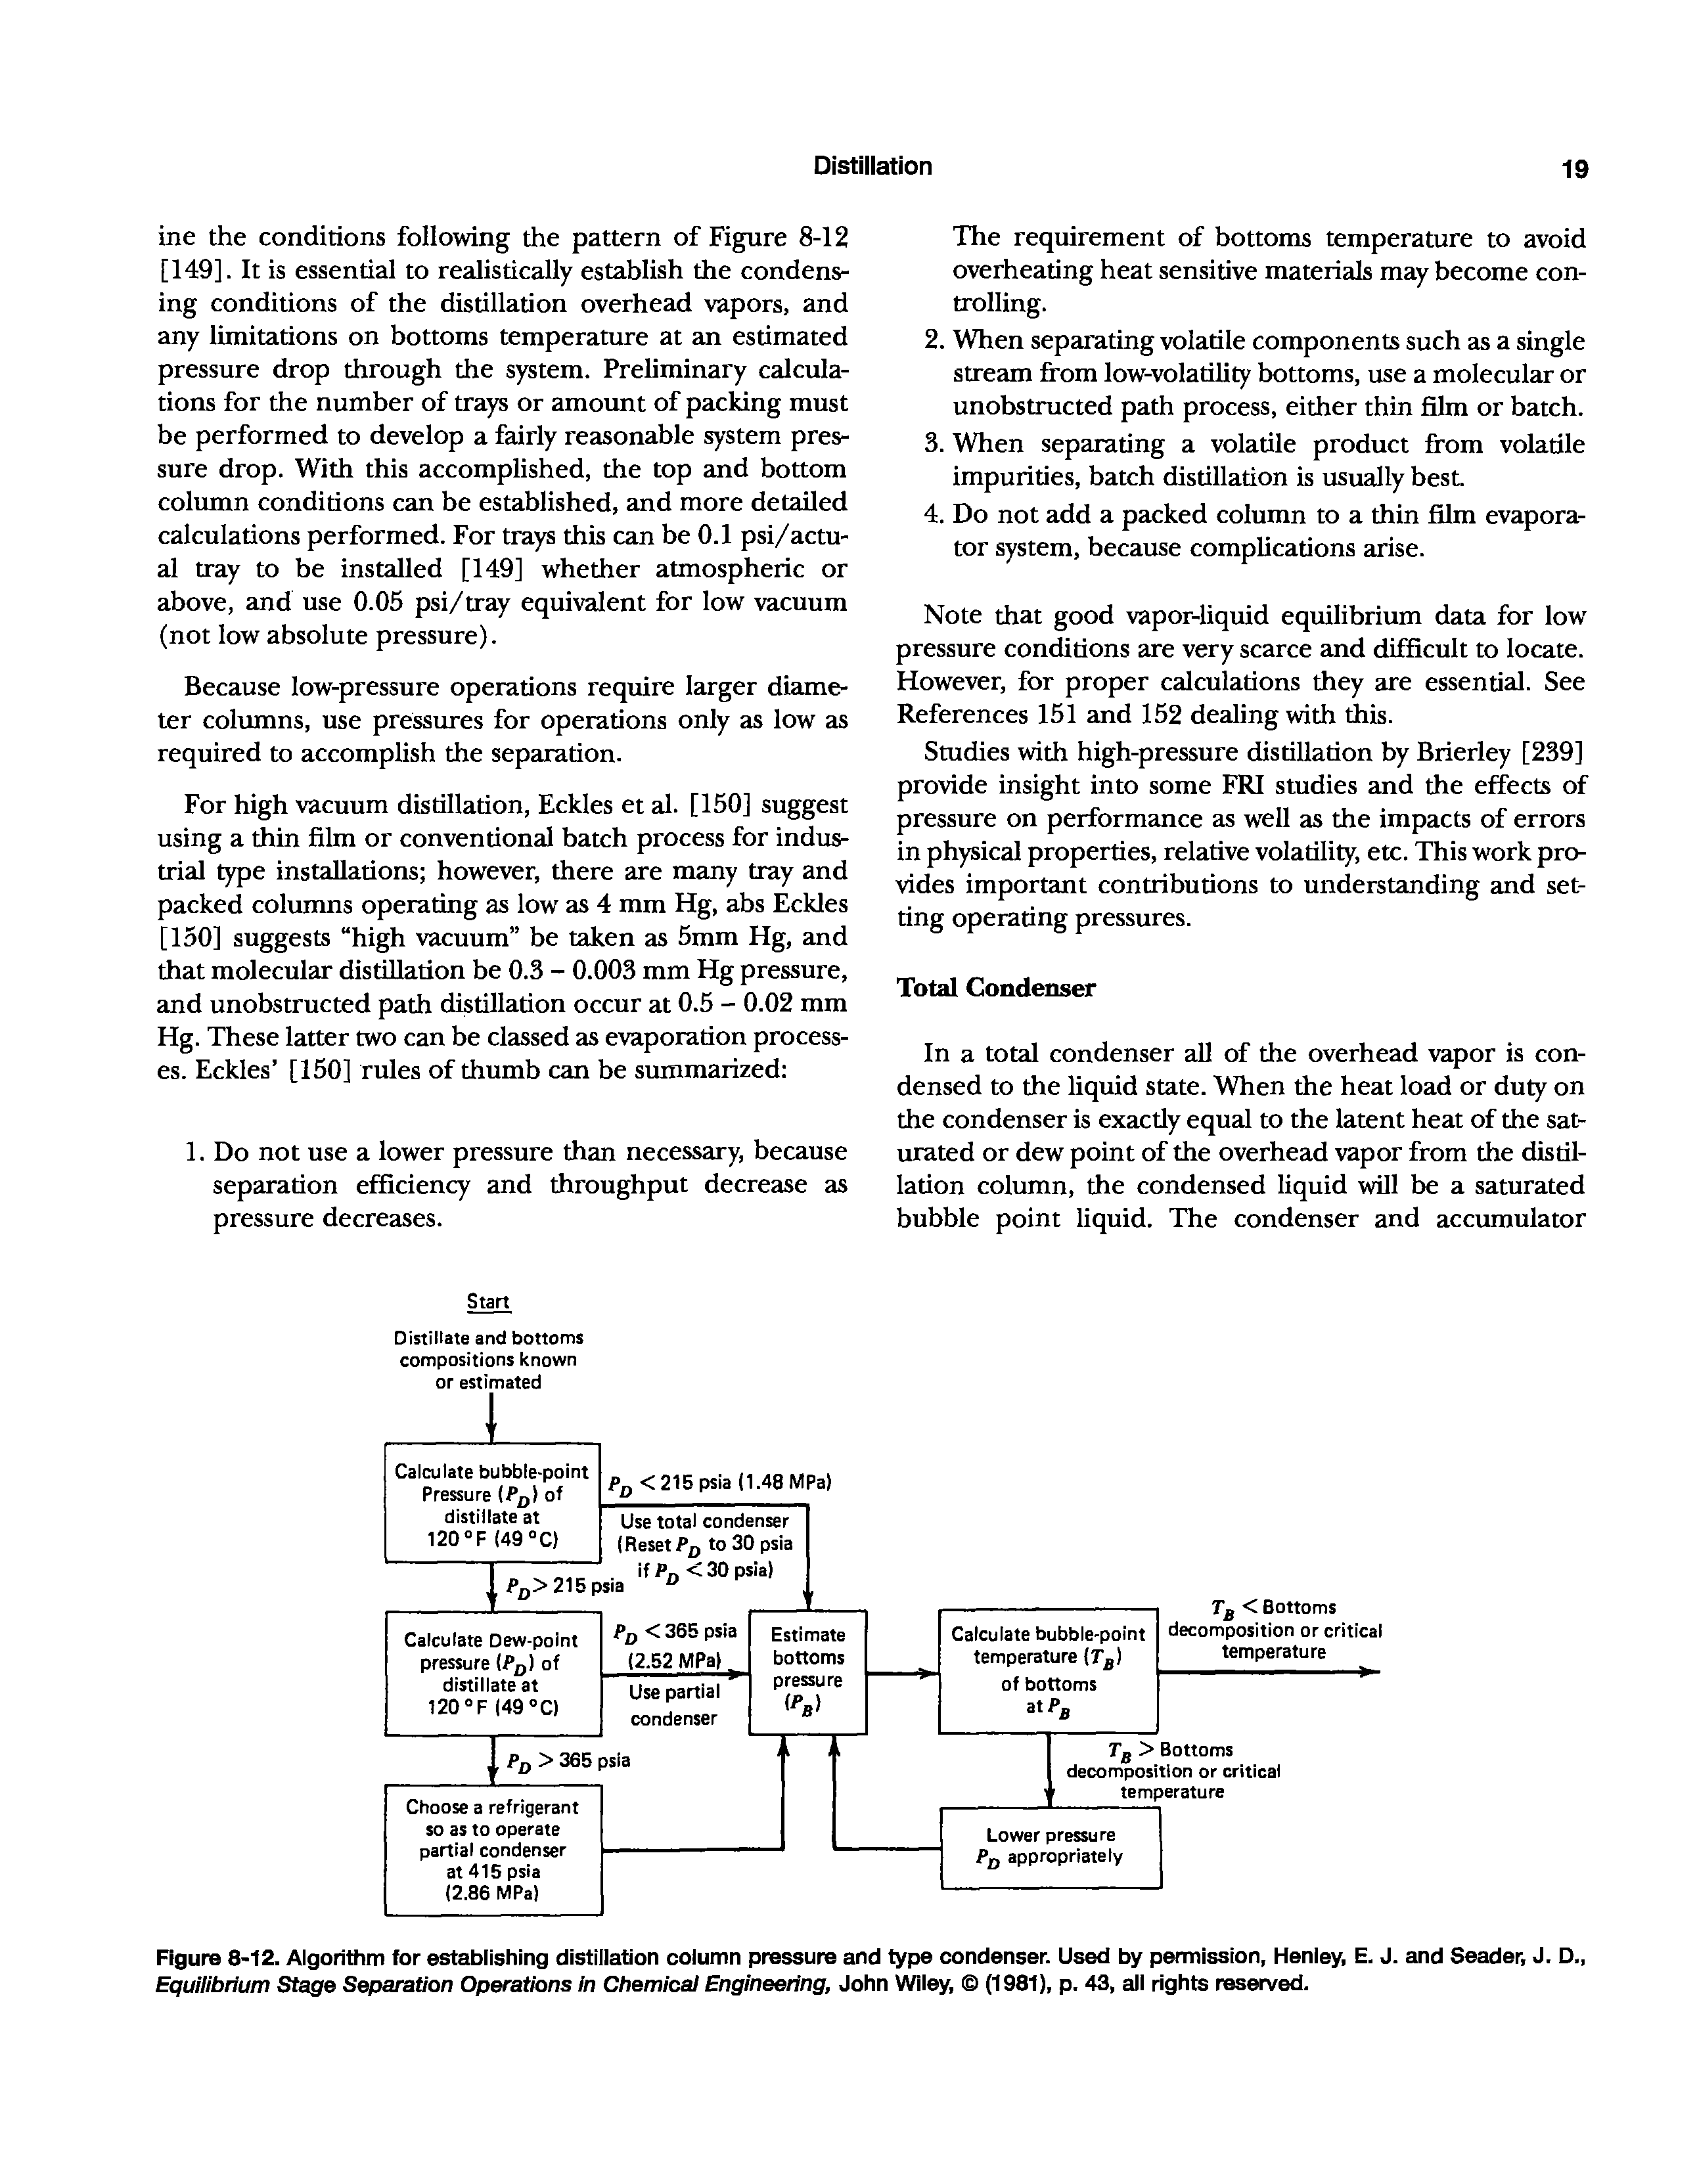 Figure 8-12. Algorithm for establishing distillation column pressure and type condenser. Used by permission, Heniey, E. J. and Seader, J. D., Equilibrium Stage Separation Operations in Chemical Engineering, John Wiiey, (1981), p. 43, aii rights reserved.